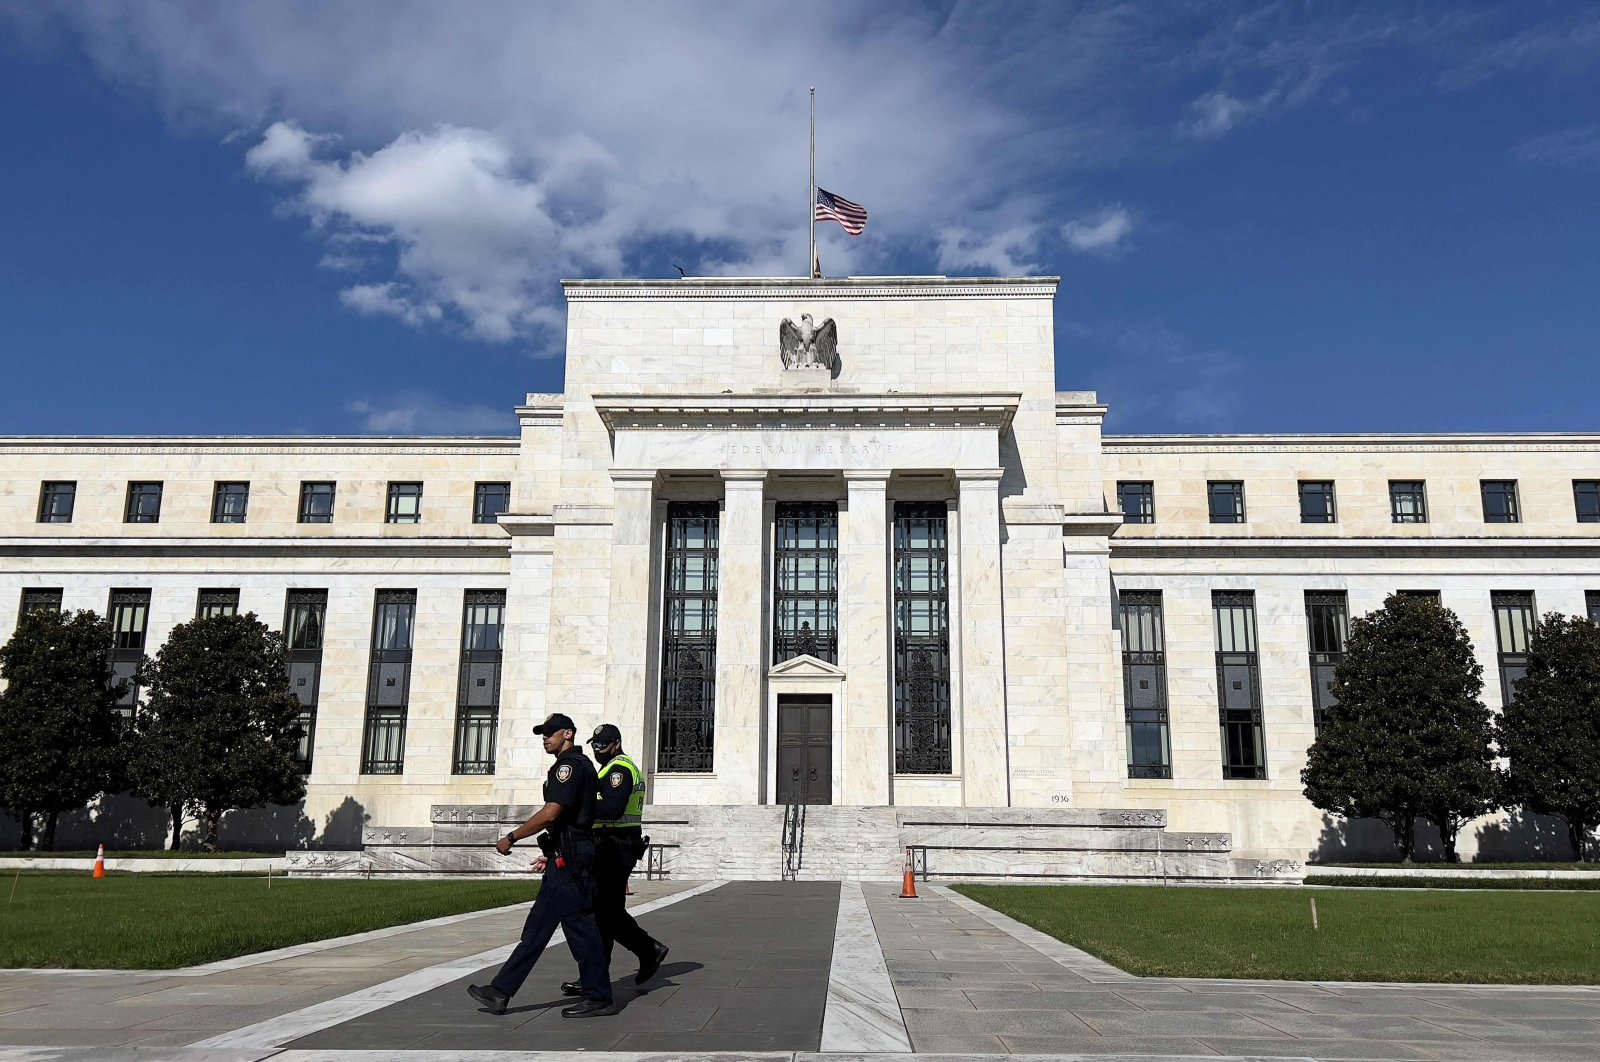 The Federal Reserve building in Washington, D.C., United States, Oct. 22, 2021. (AFP Photo)